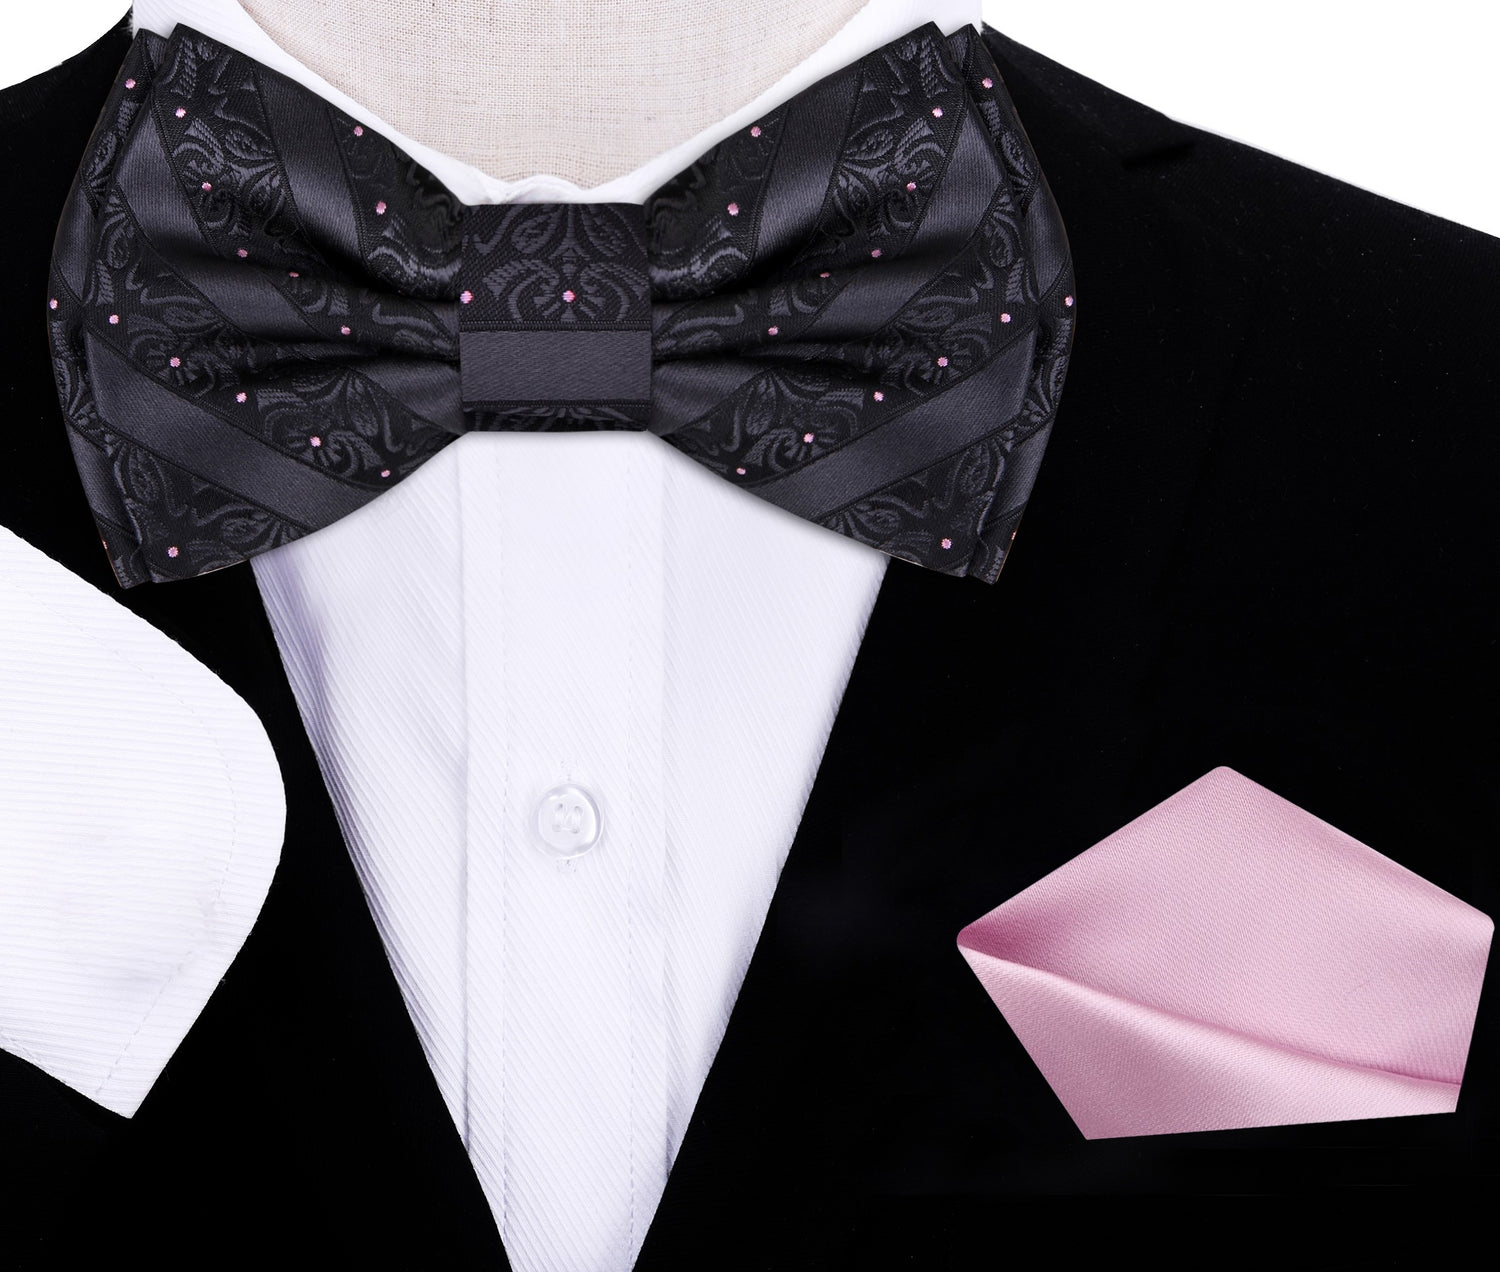 A Black Color Intricate Vine Texture Pattern Silk Kids Pre-Tied Bow Tie, Accenting Pink Pocket Square On Suit